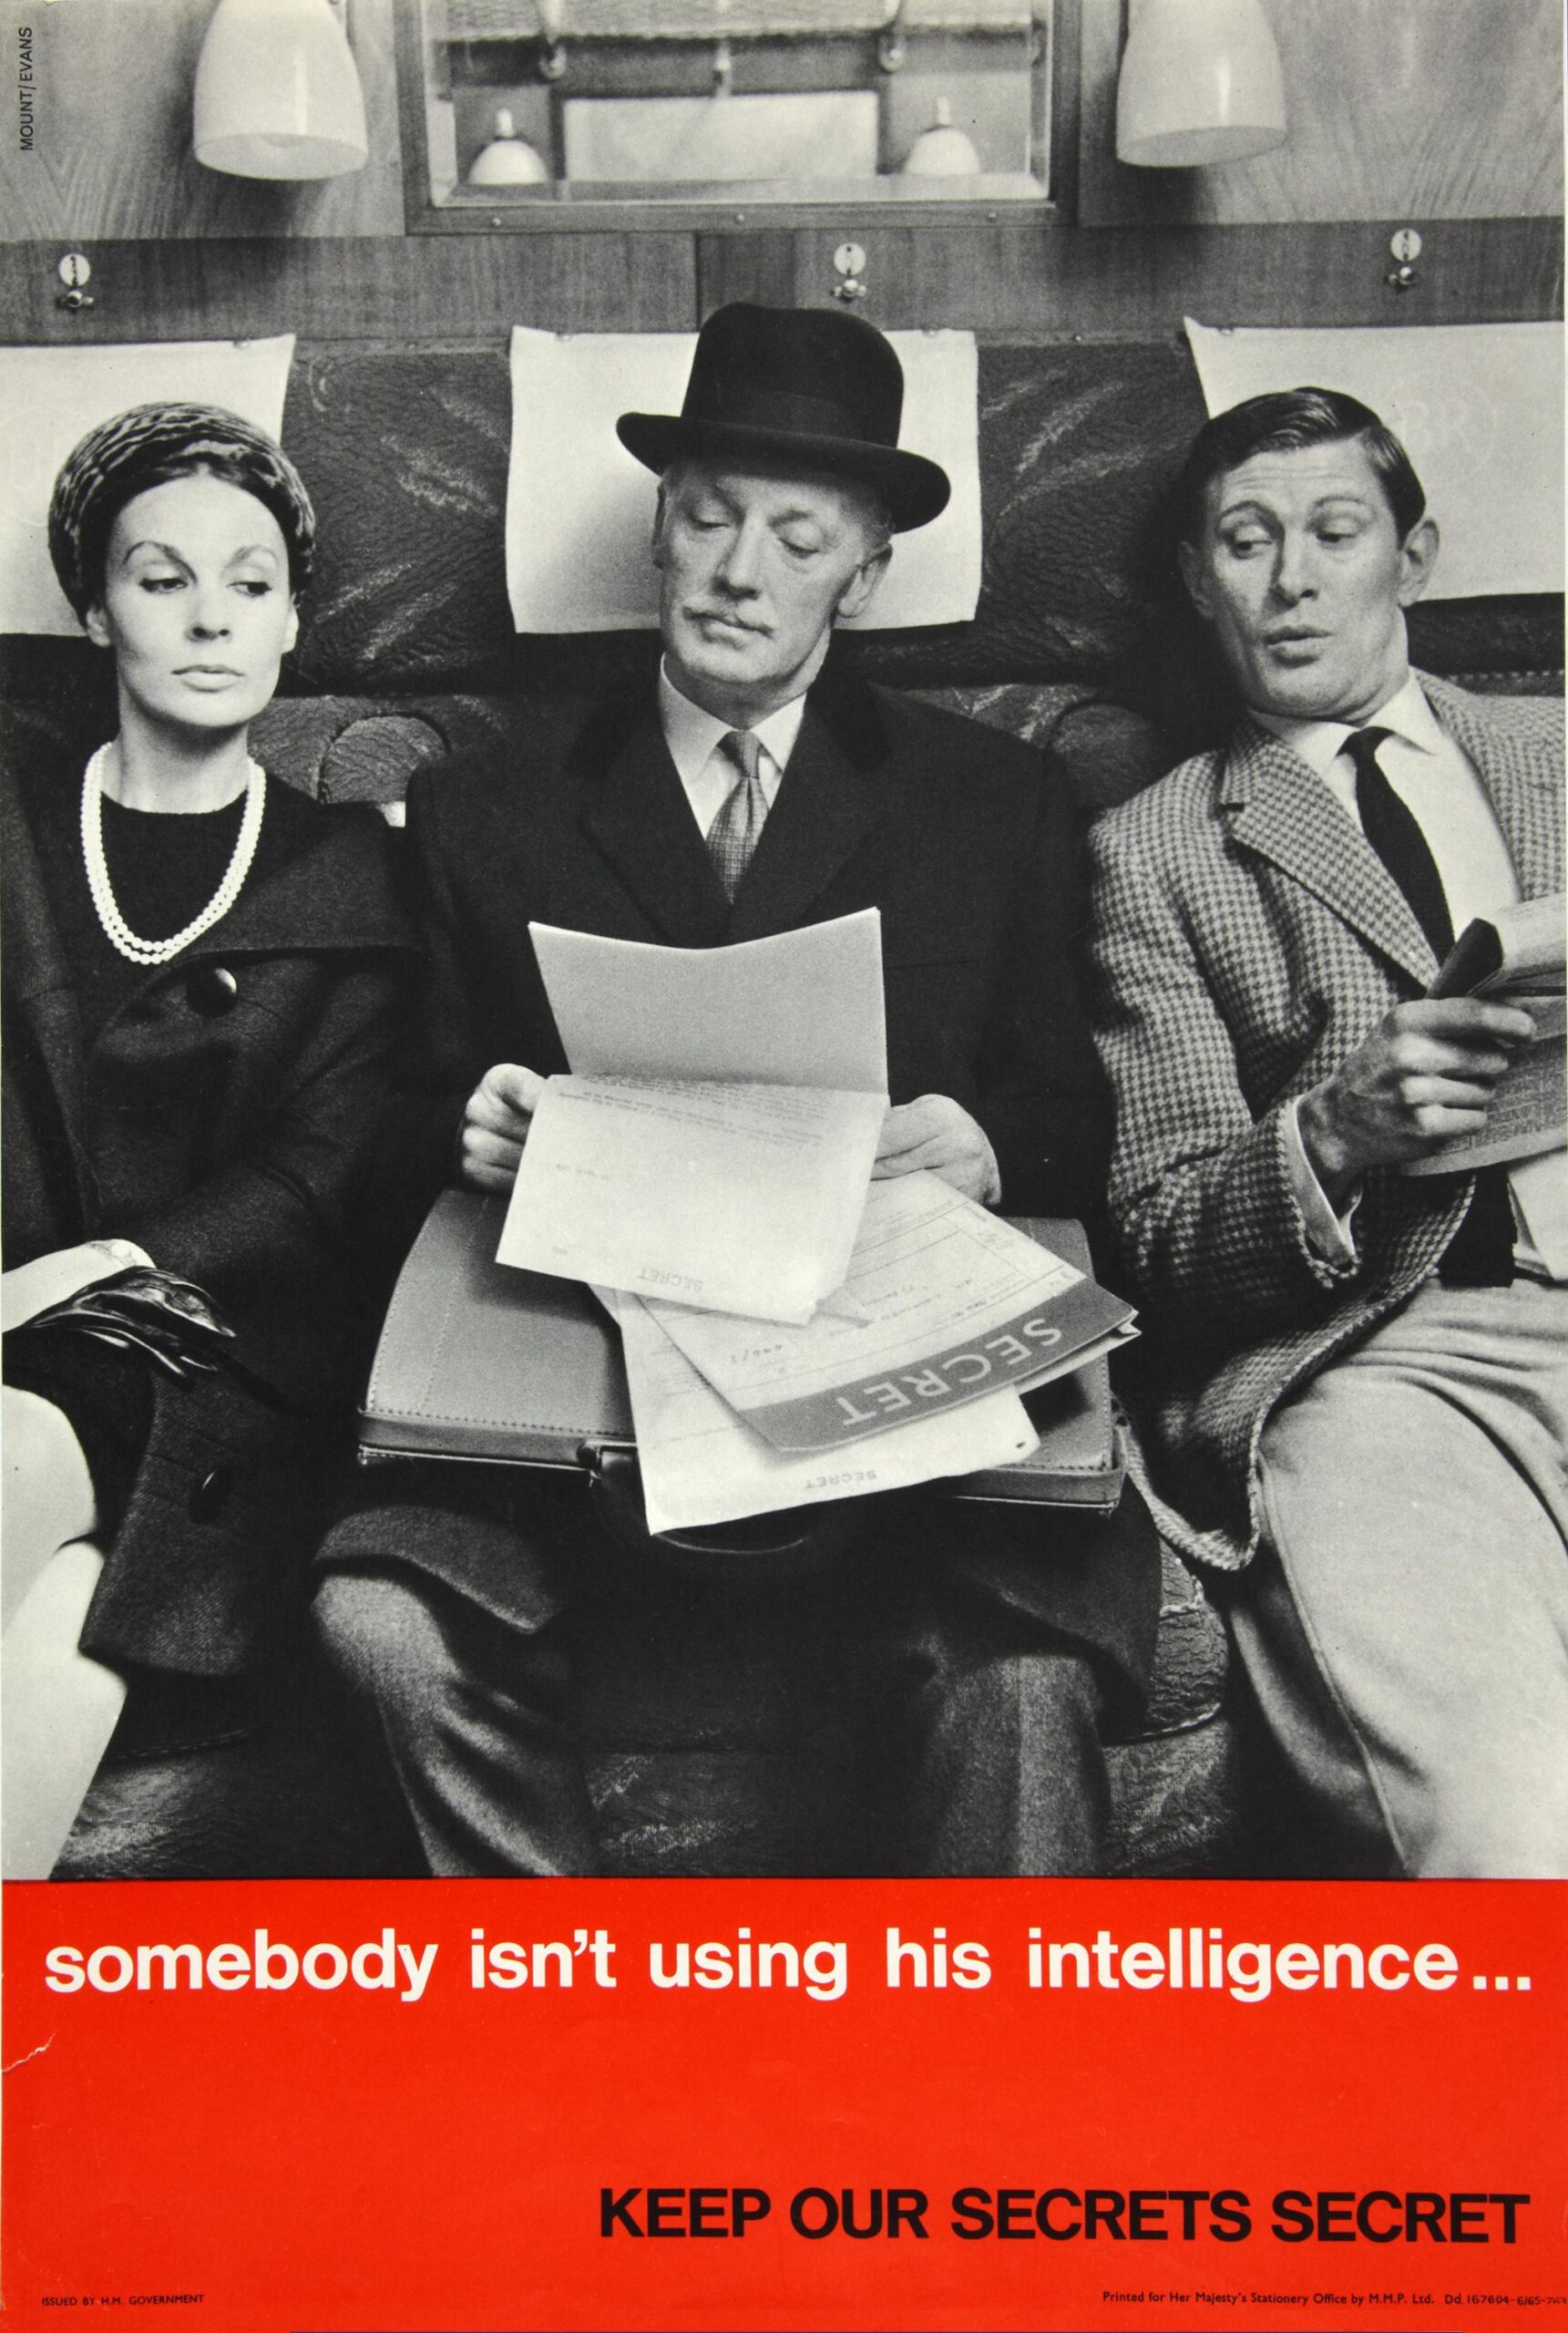 A man in a bowler hat reads papers marked Secret as a man and a woman read over his shoulder.